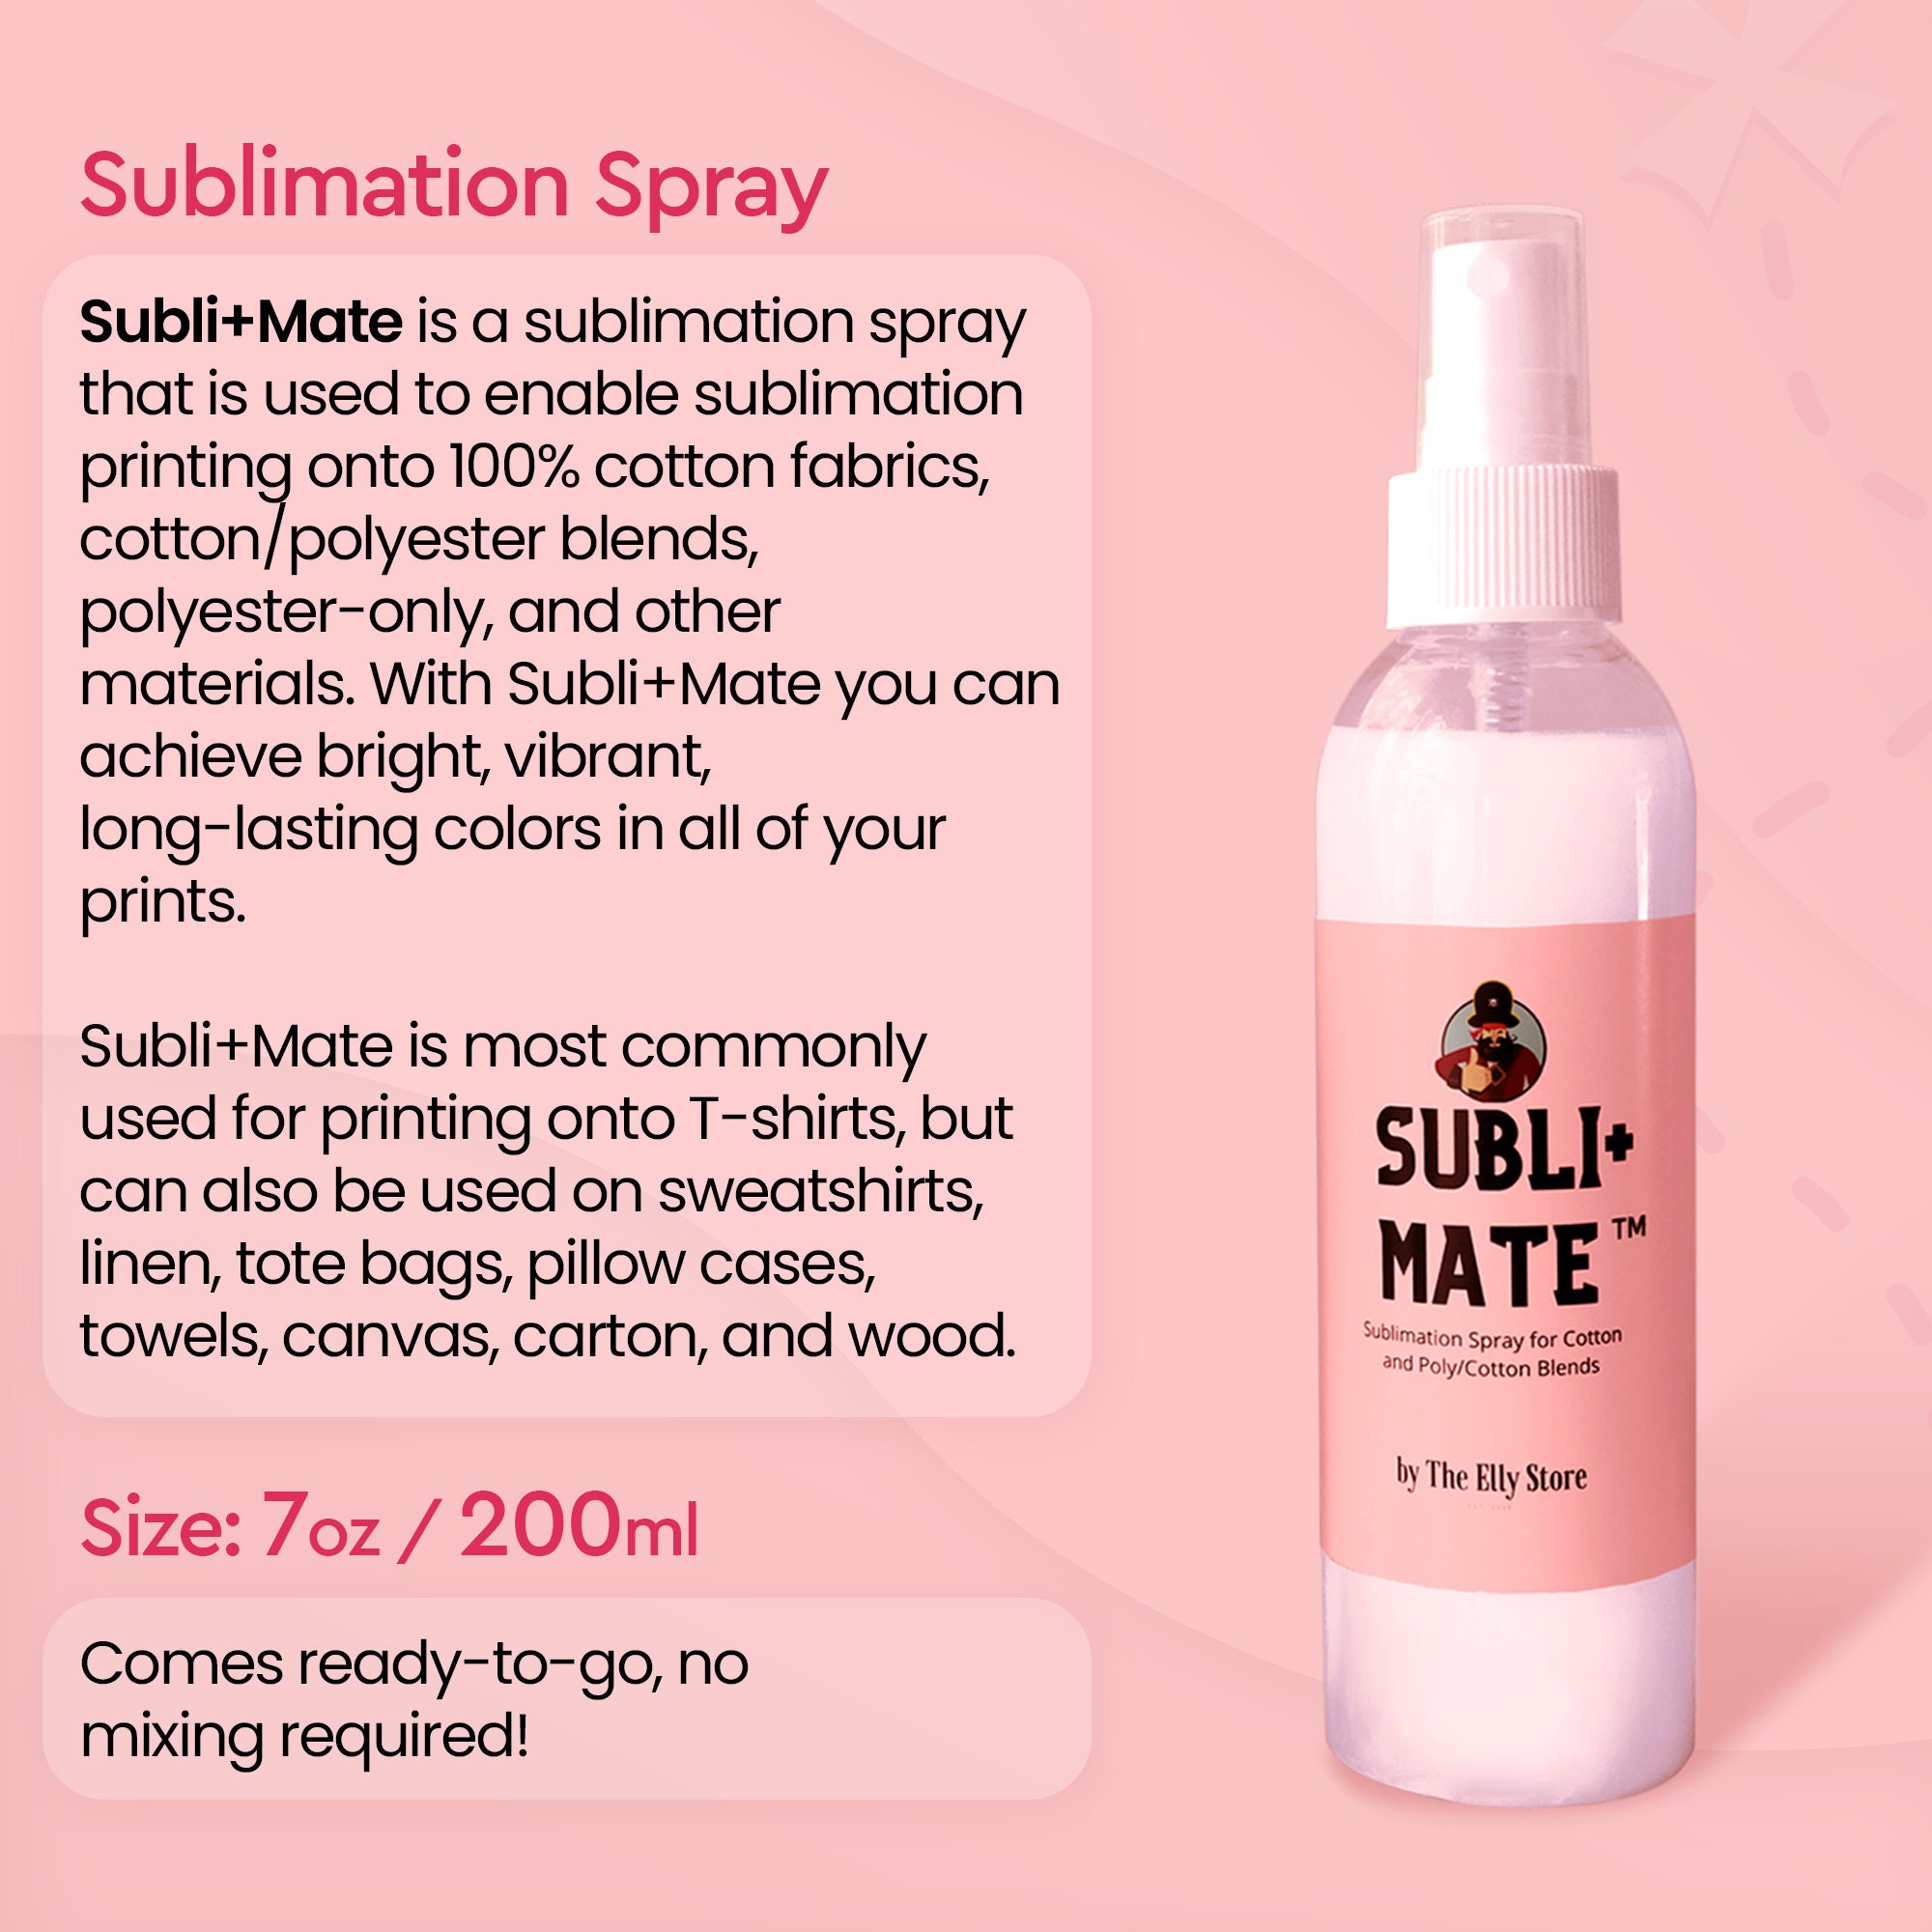 Subli+Mate Sublimation Spray for Cotton and Cotton/Polyester Blends.